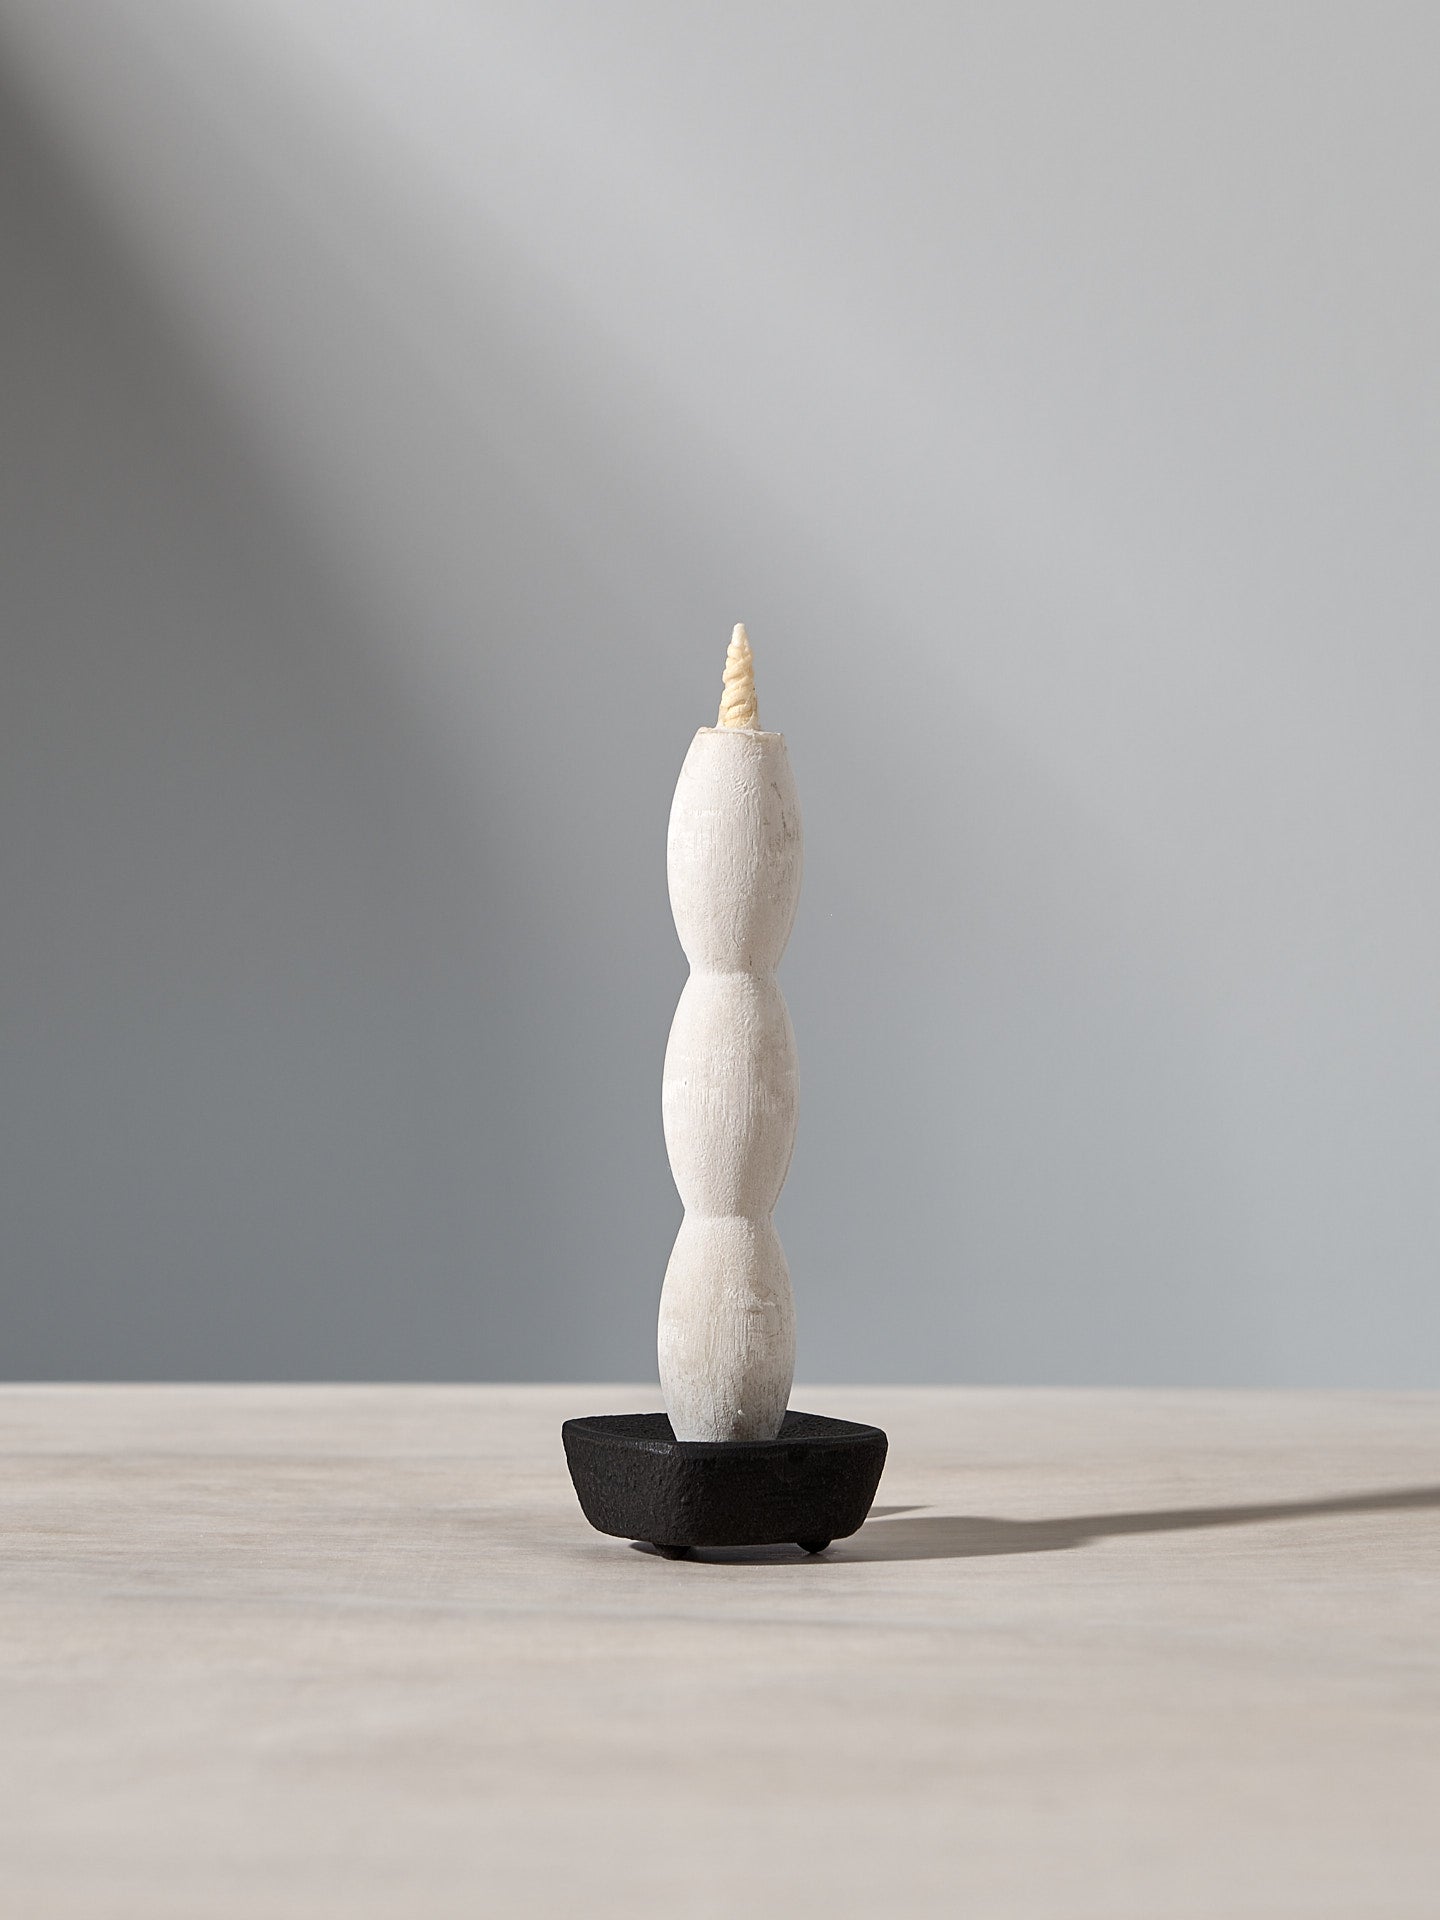 A NANAO-A candle sitting on top of a wooden table, manufactured by Takazawa.